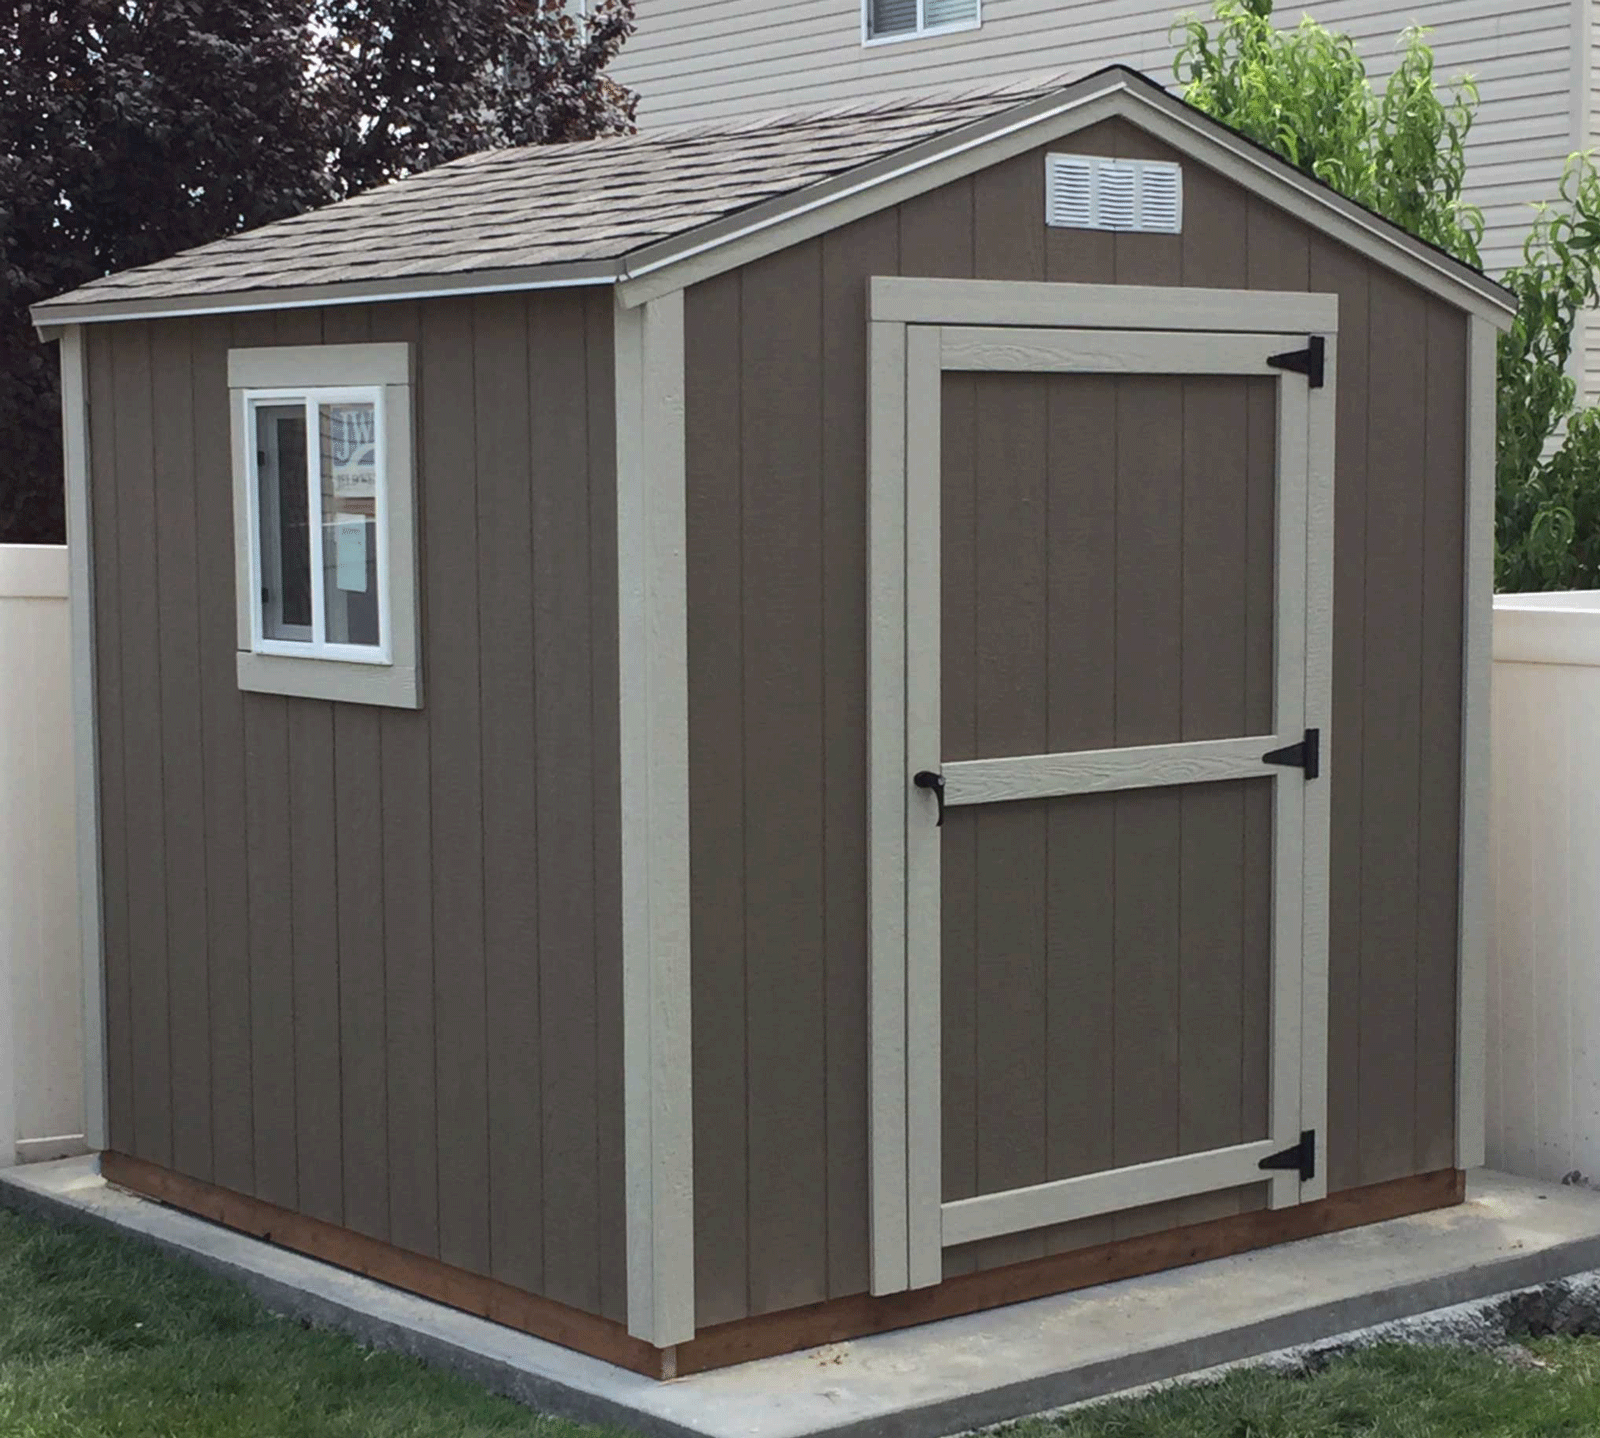 An 8 foot by 10 foot Standard Apex Shed with a 24 inch by 24 inch window